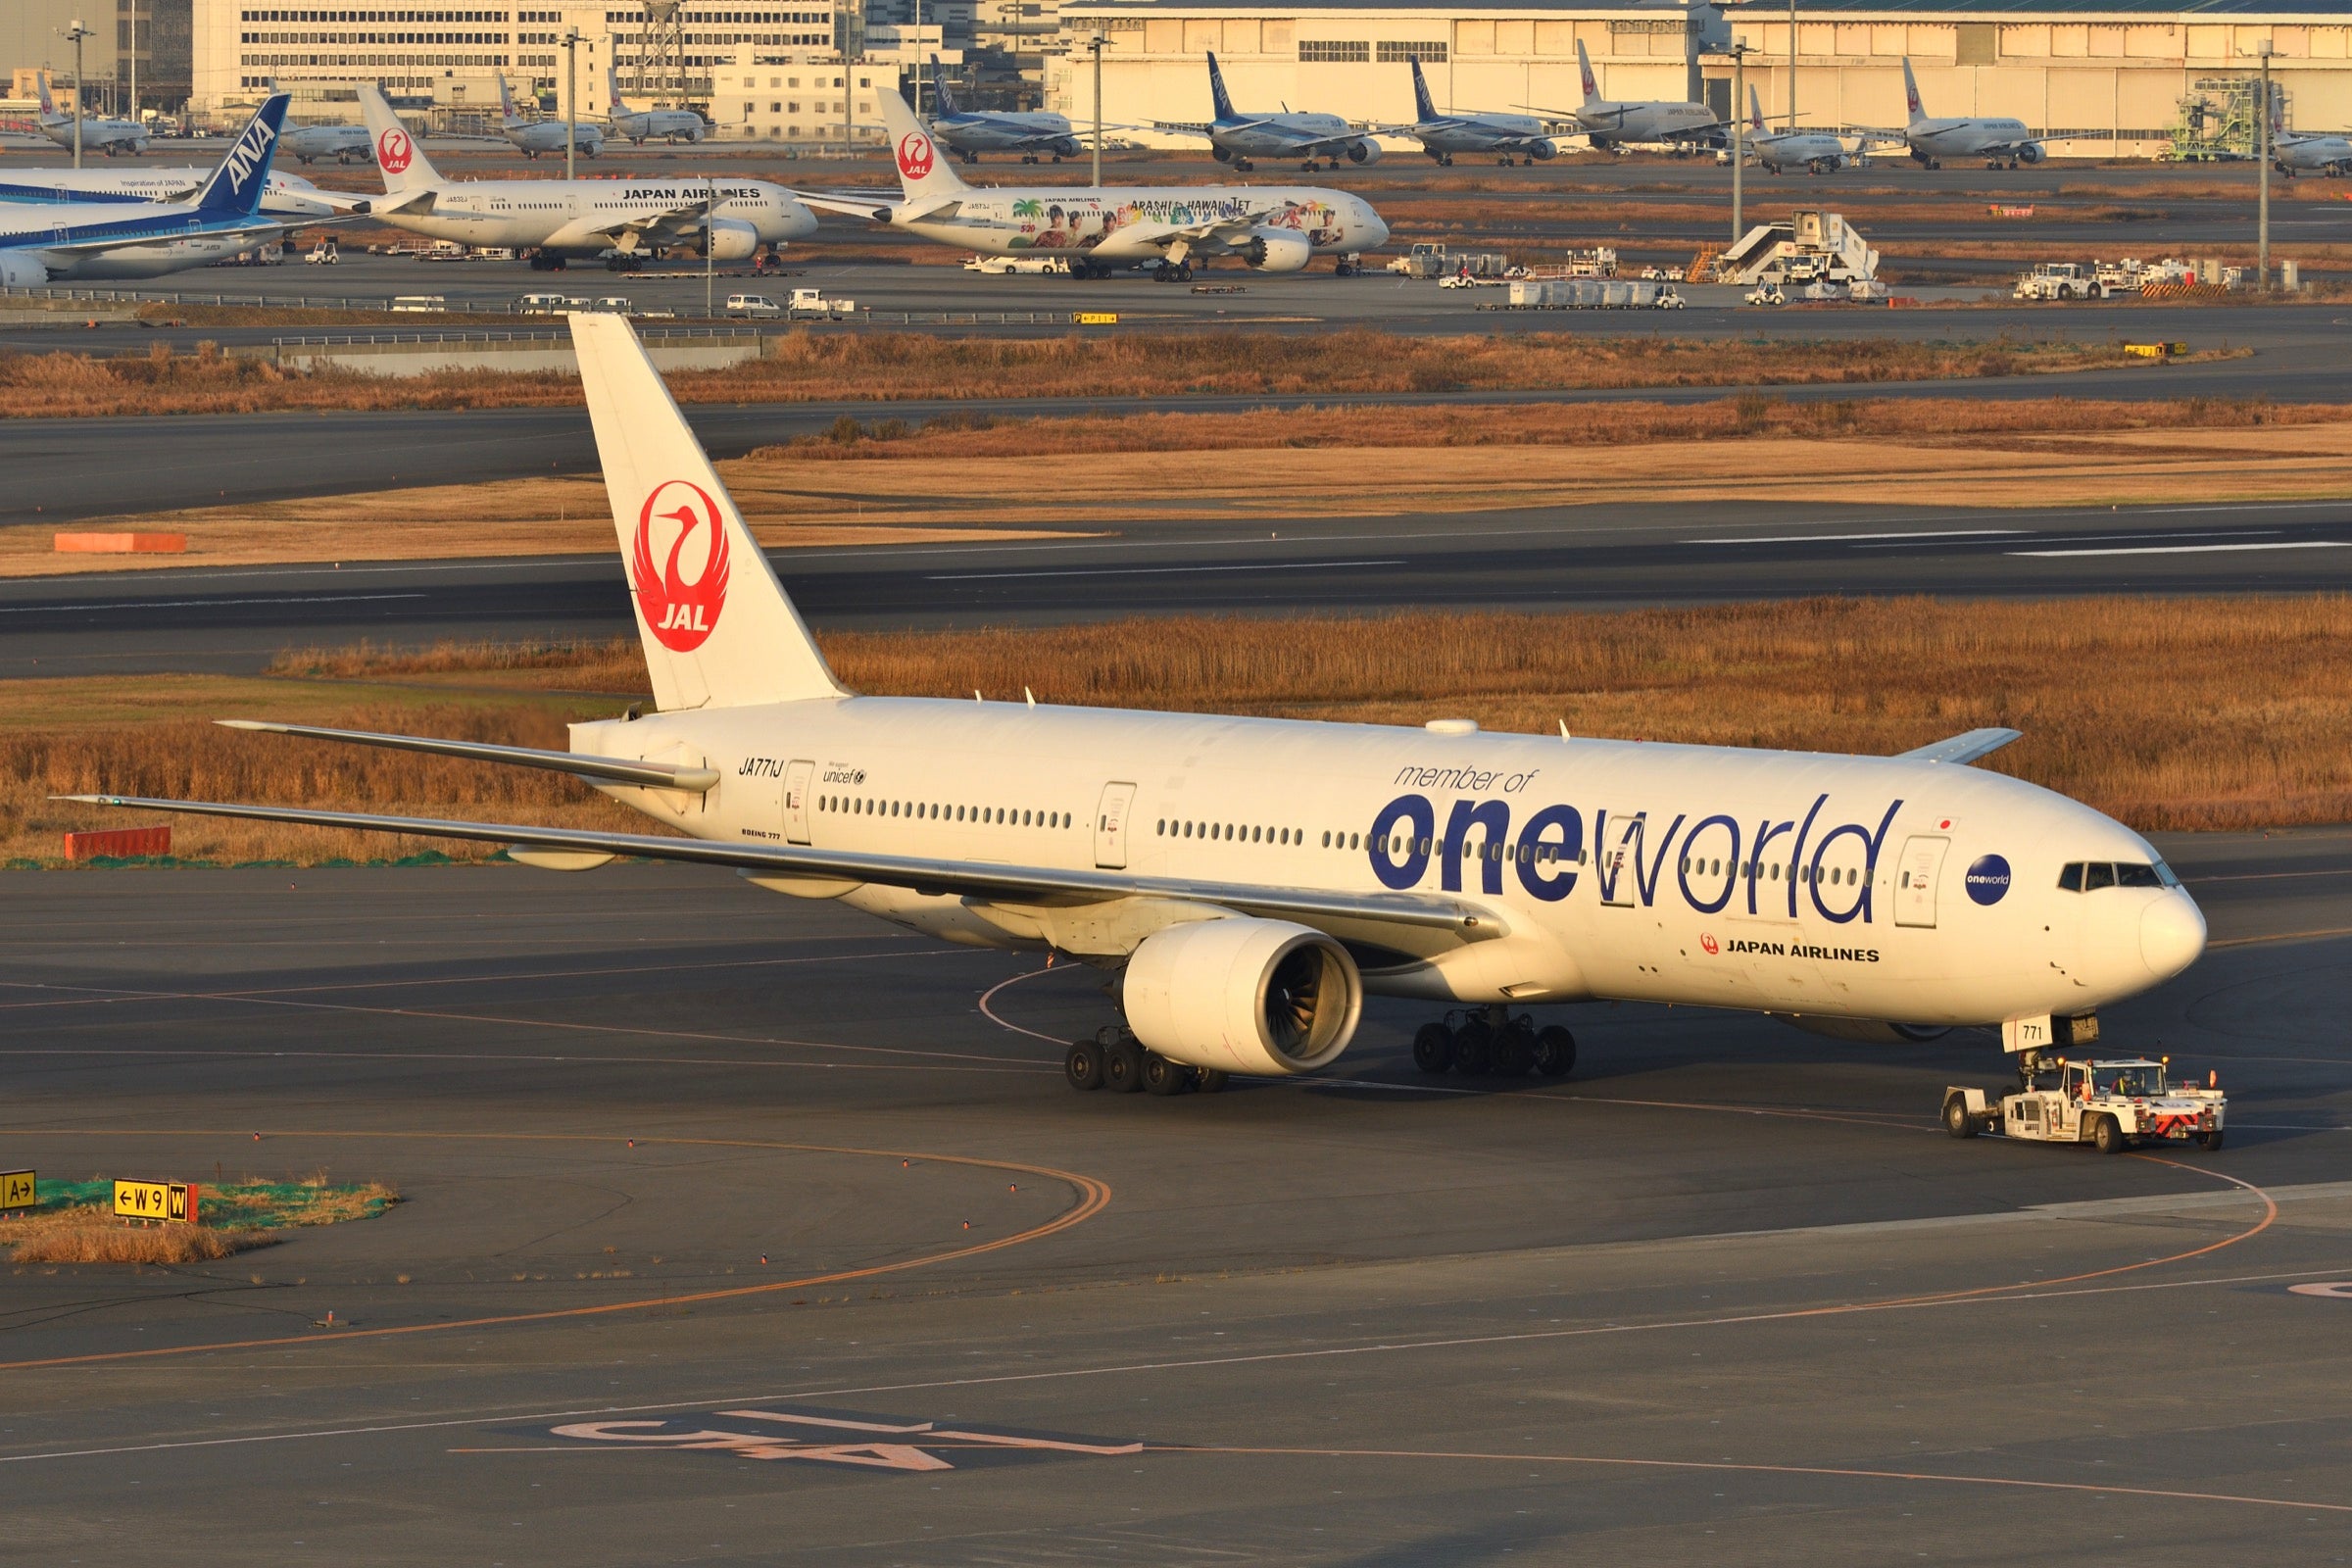 Japan Airlines aircraft in Oneworld Alliance livery